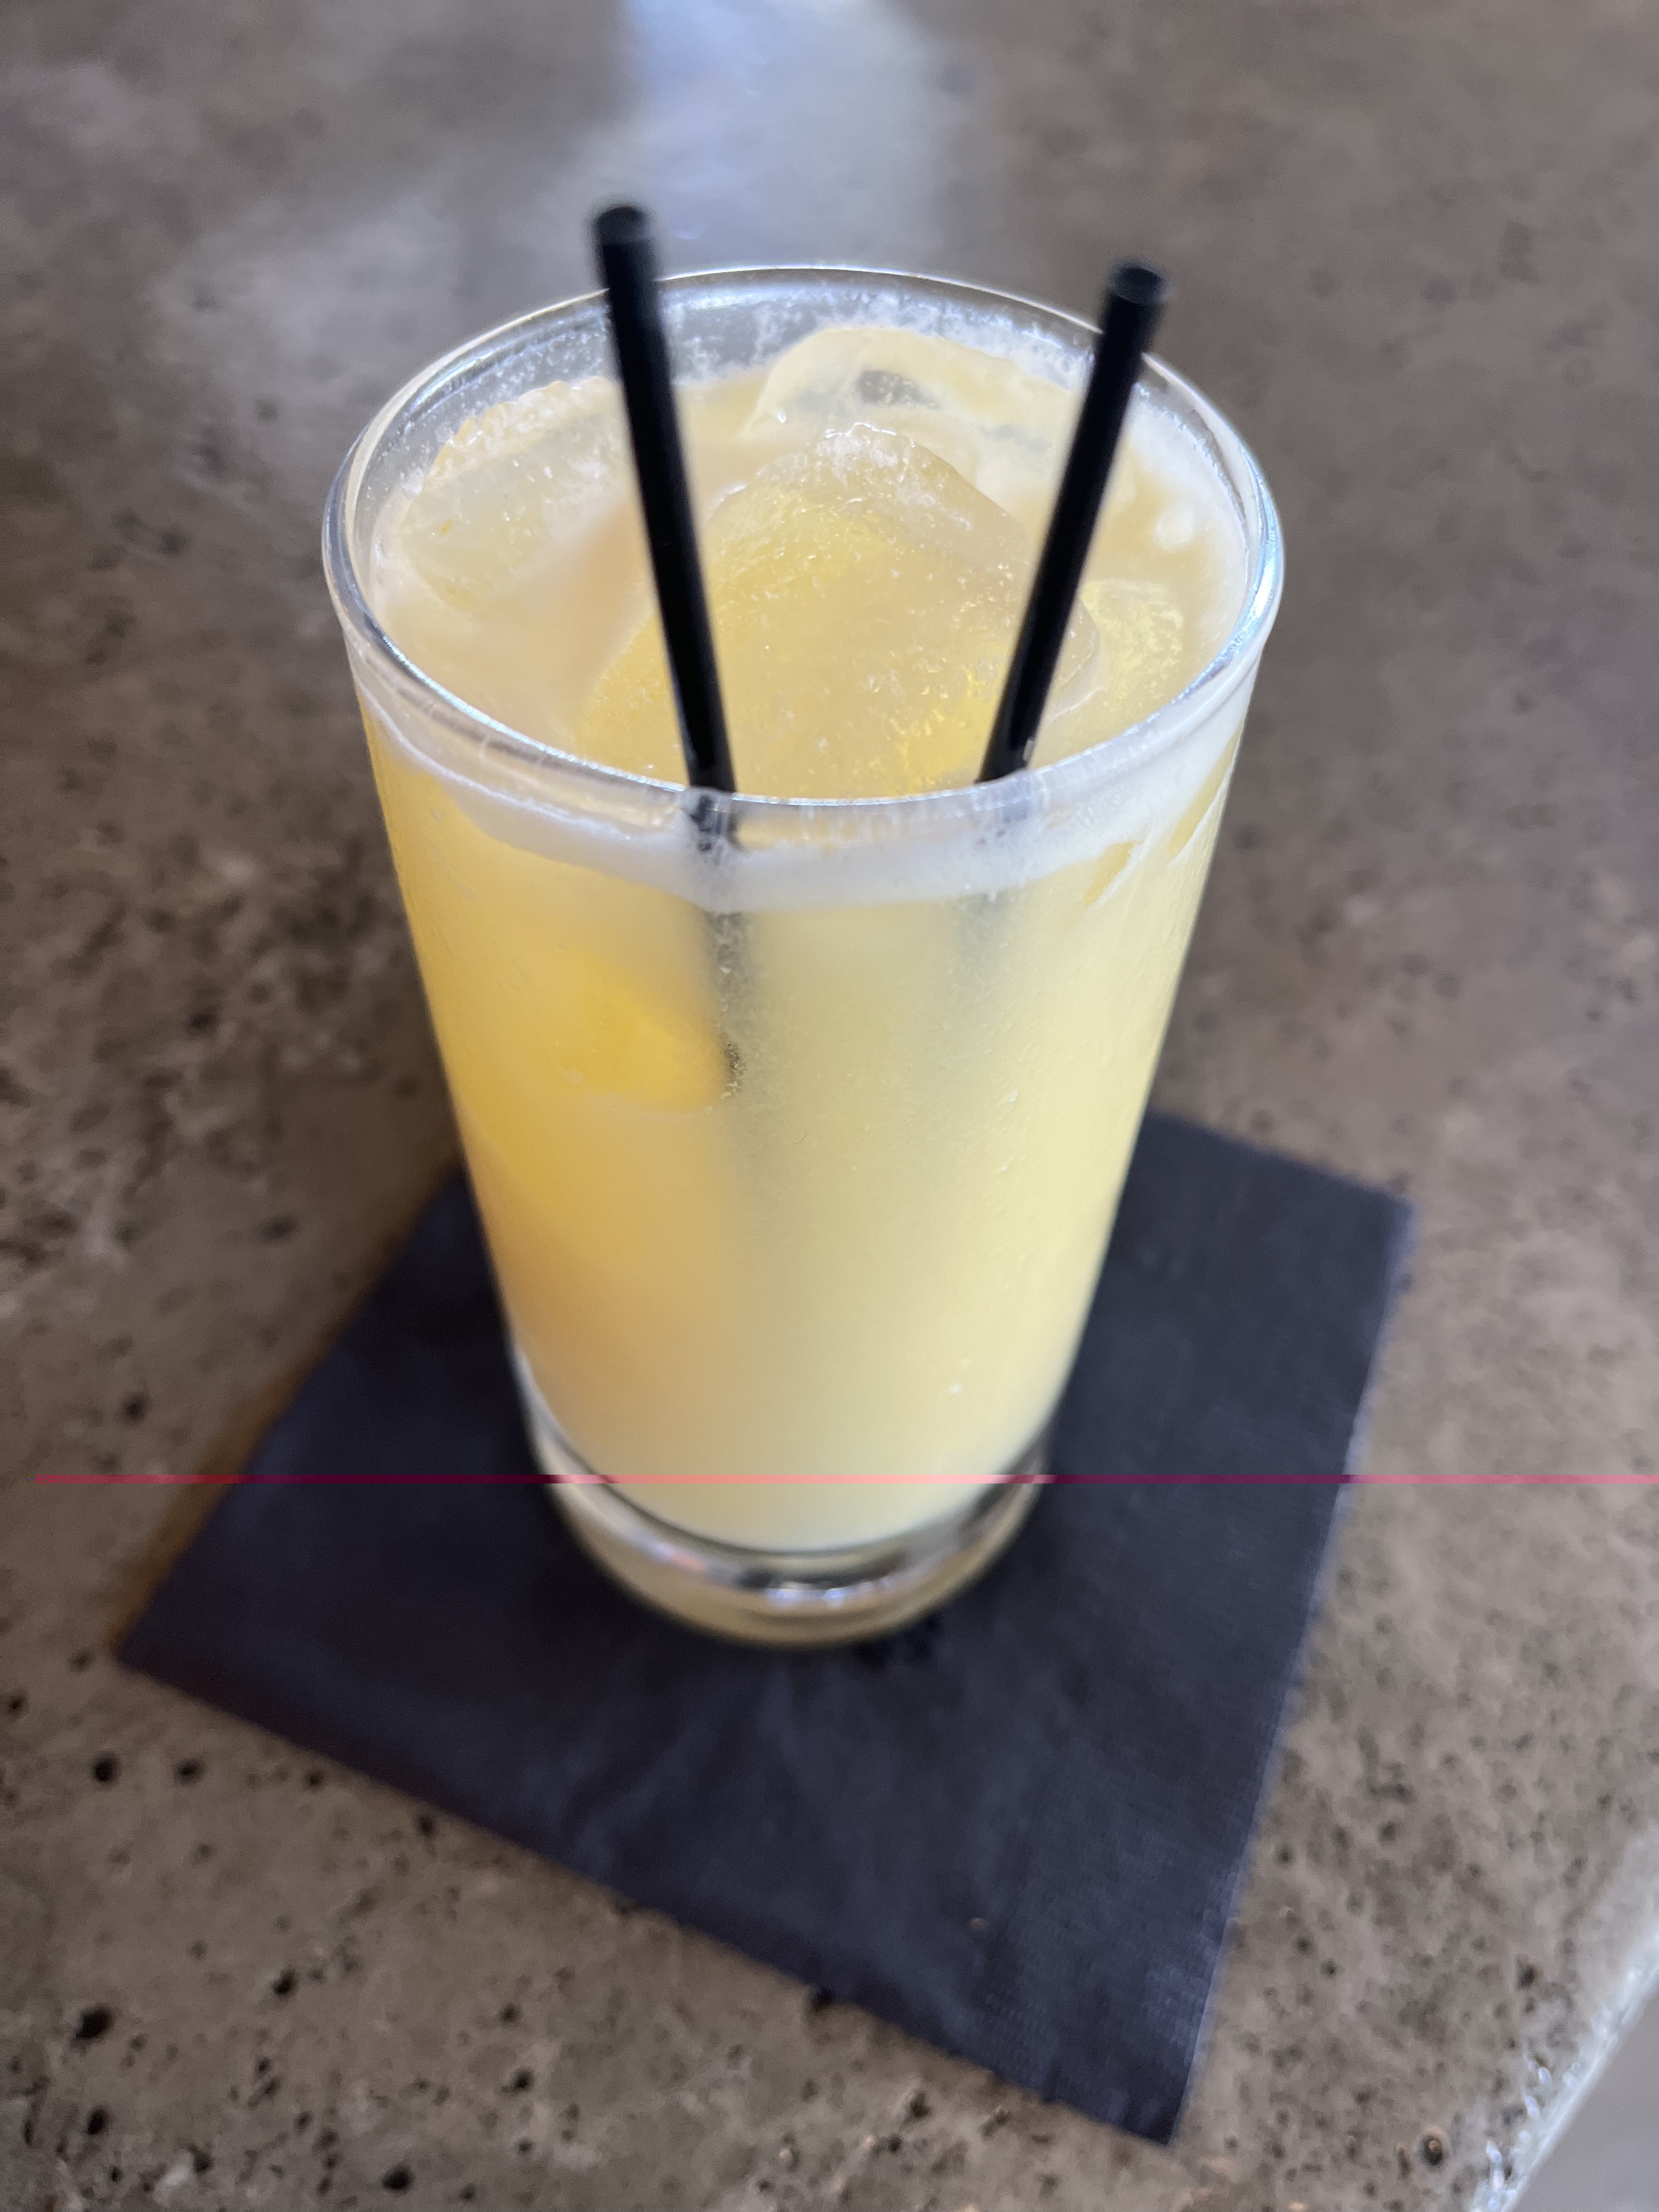 A yellow cocktail in a pint glass sits on a black napkin